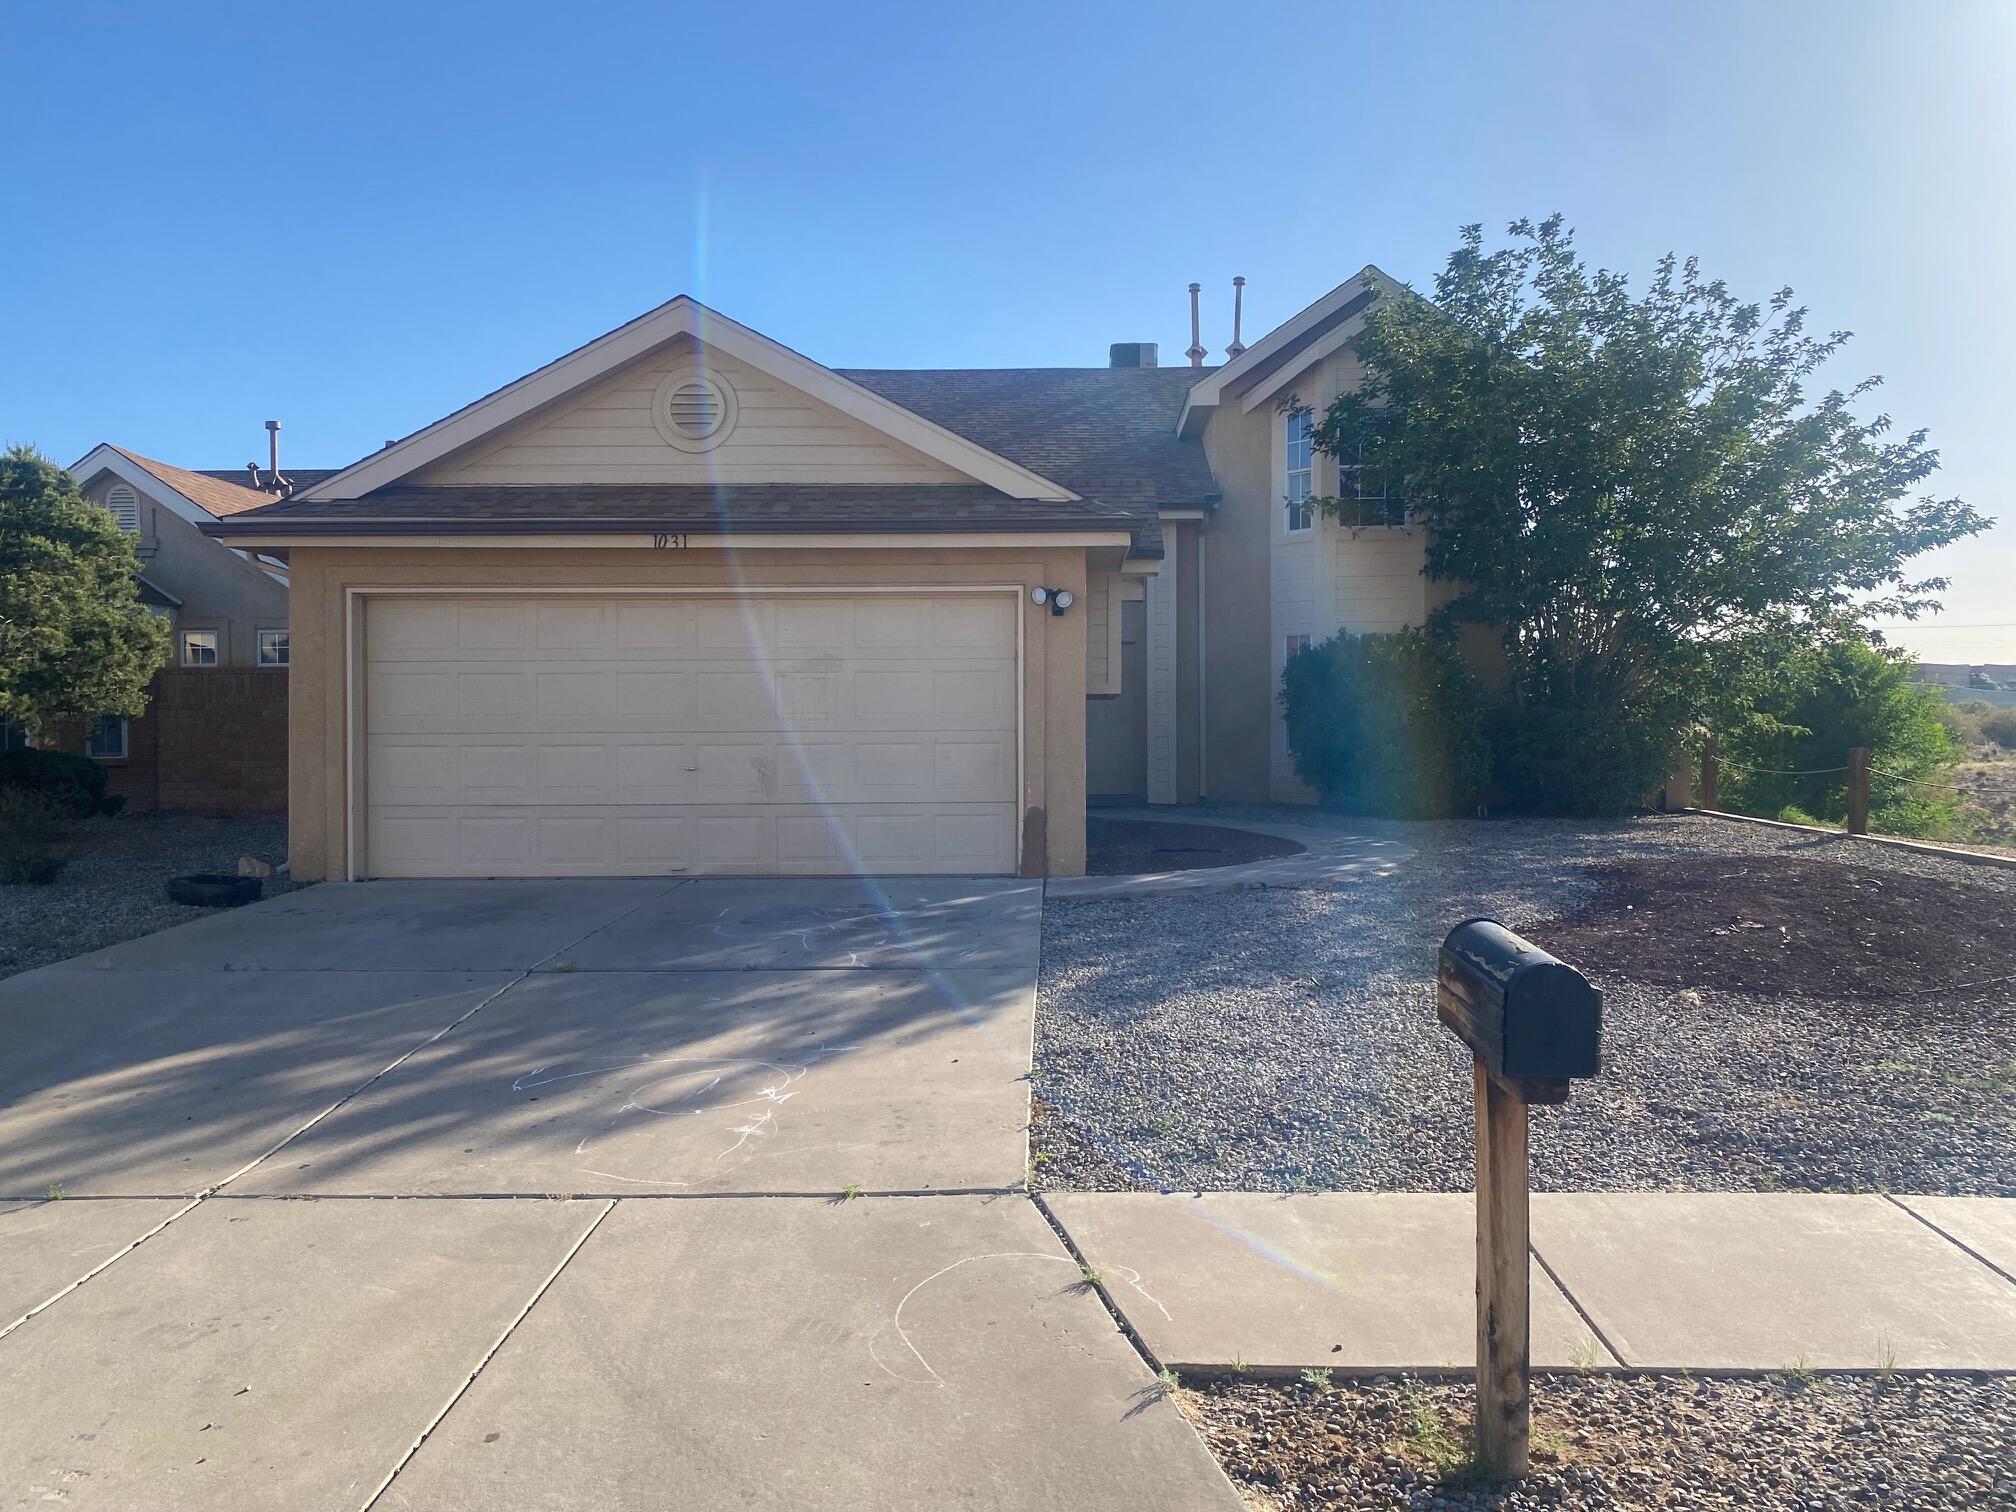 Cute cozy home. Kitchen includes granite counter tops and stainless steel appliances.Tile in living area and formal dining area, also in bathrooms. Enjoy local school sports  as home backs up to HS field. Great home for your family.